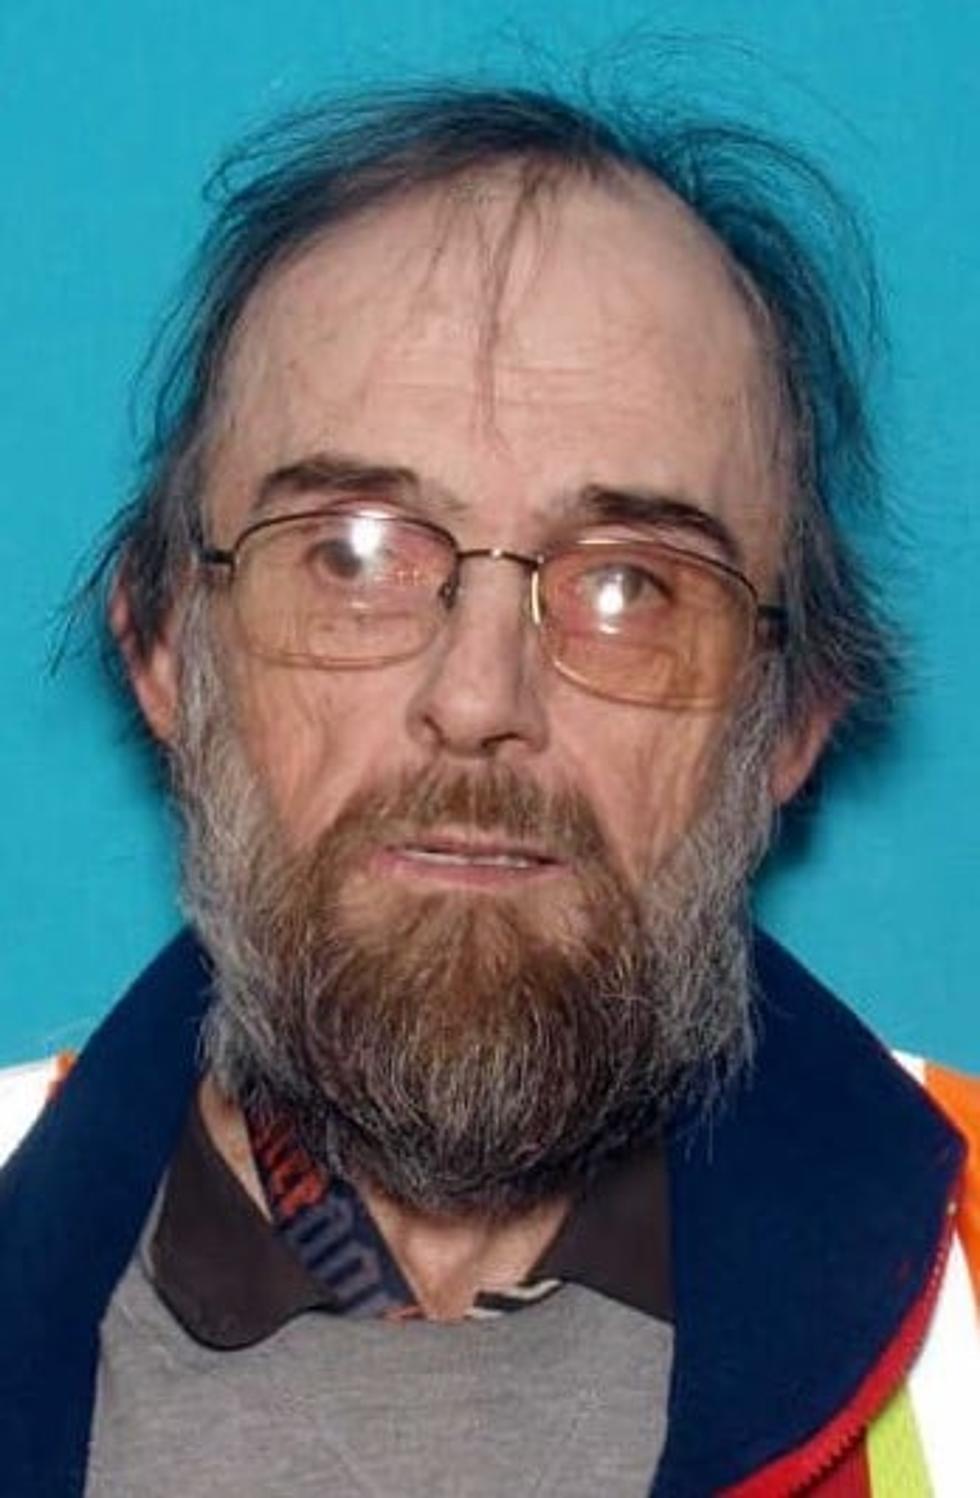 Northfield Police Looking For Help In Locating Missing “Endangered” Man